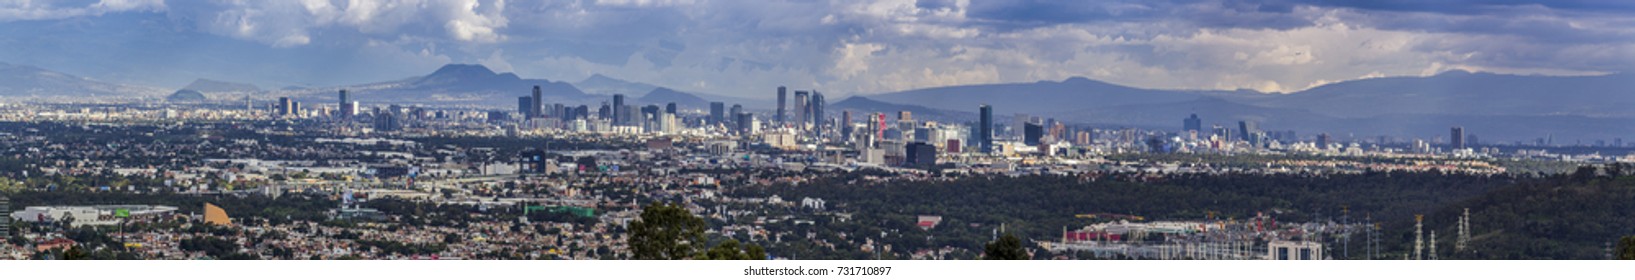 Mexico City - october 5, 2017, Mexico City skyline panorama including all buildings from city center with latin american tower, over to mayor tower and Bancomer tower until world trade center building